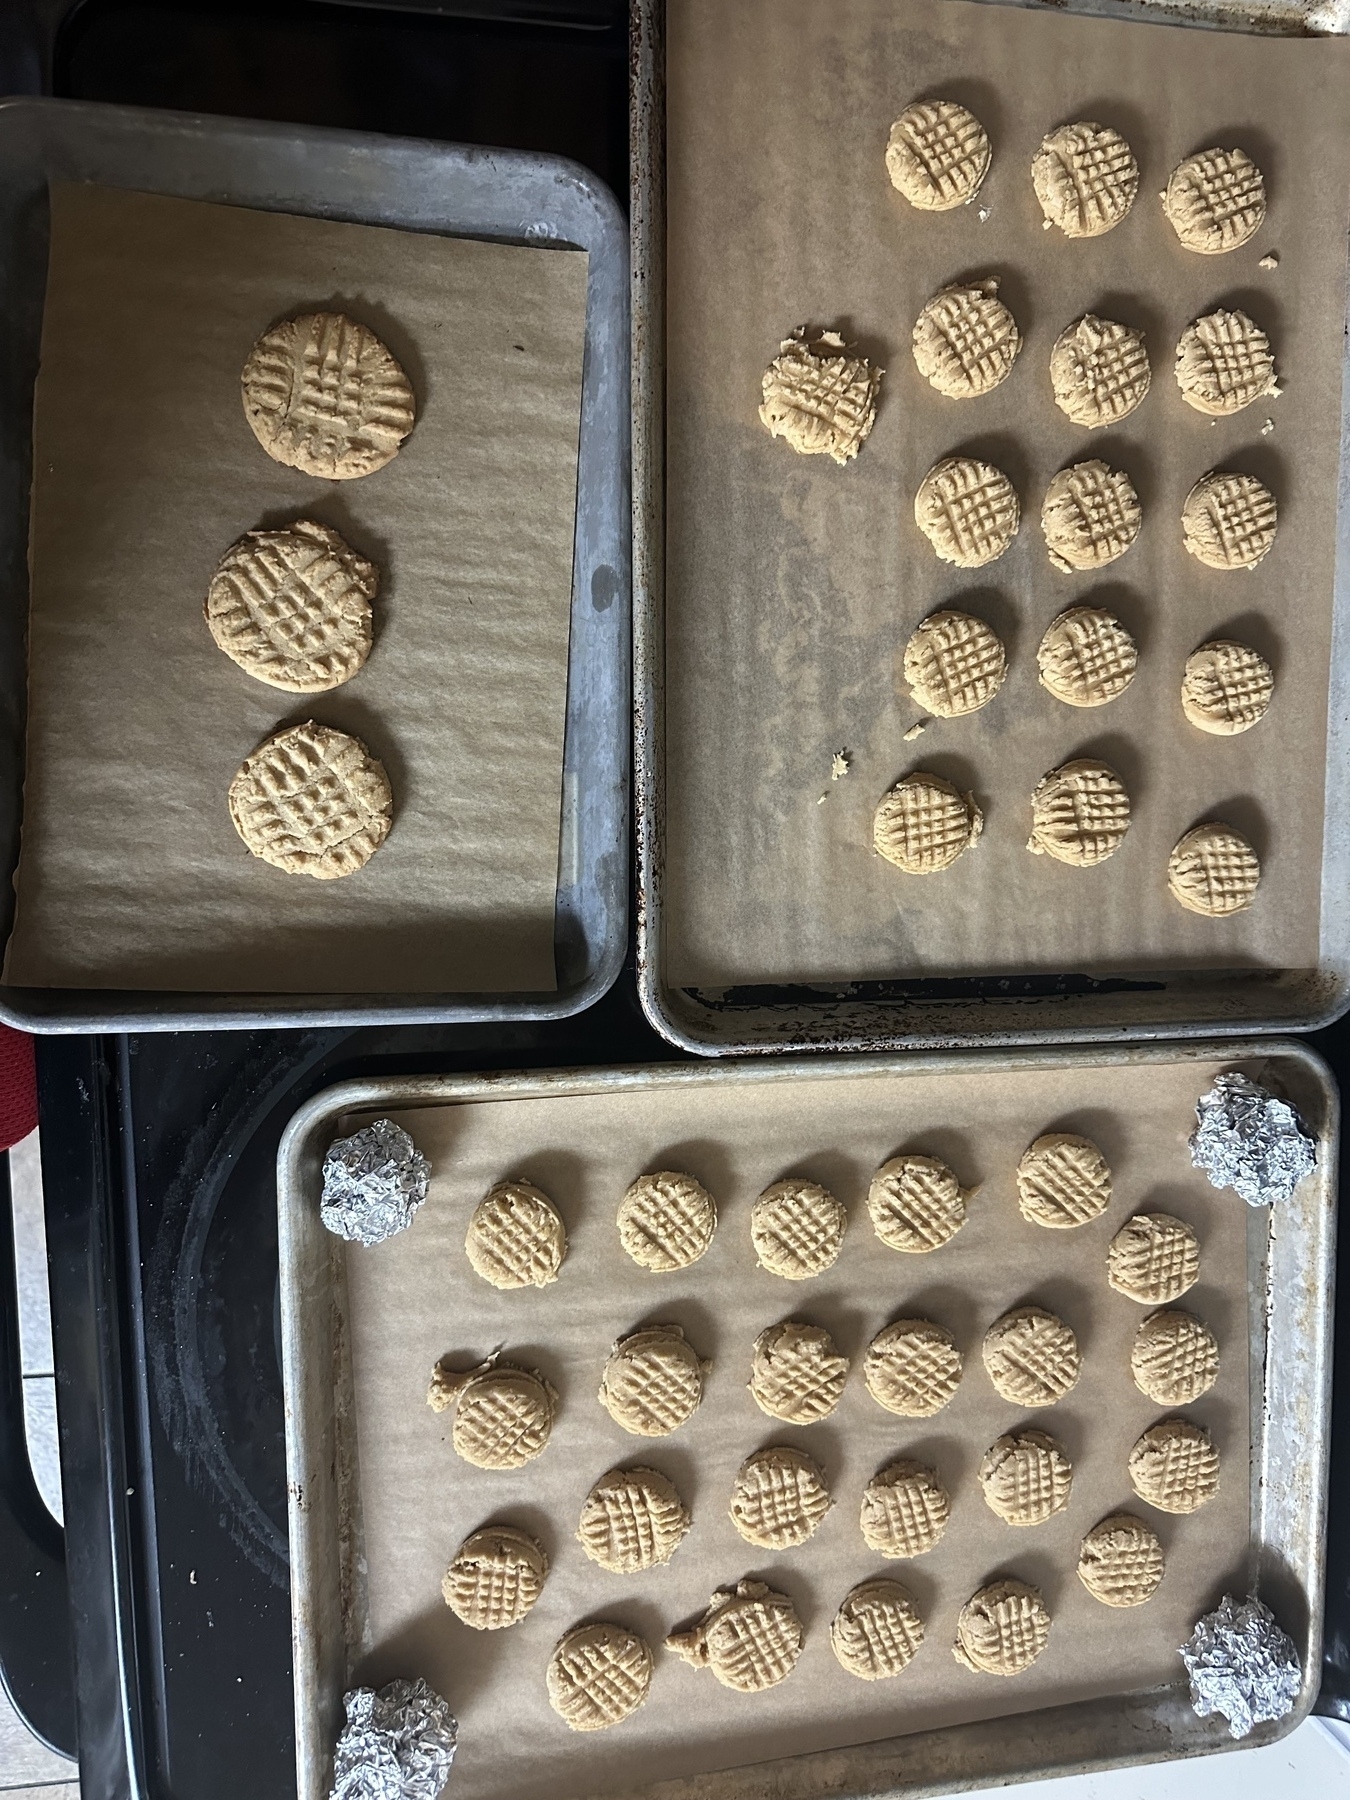 Three baked peanut butter cookies on one tray with two other larger trays of unbaked cookies - plus aluminum foil balls that allow the trays to stack in the freezer 